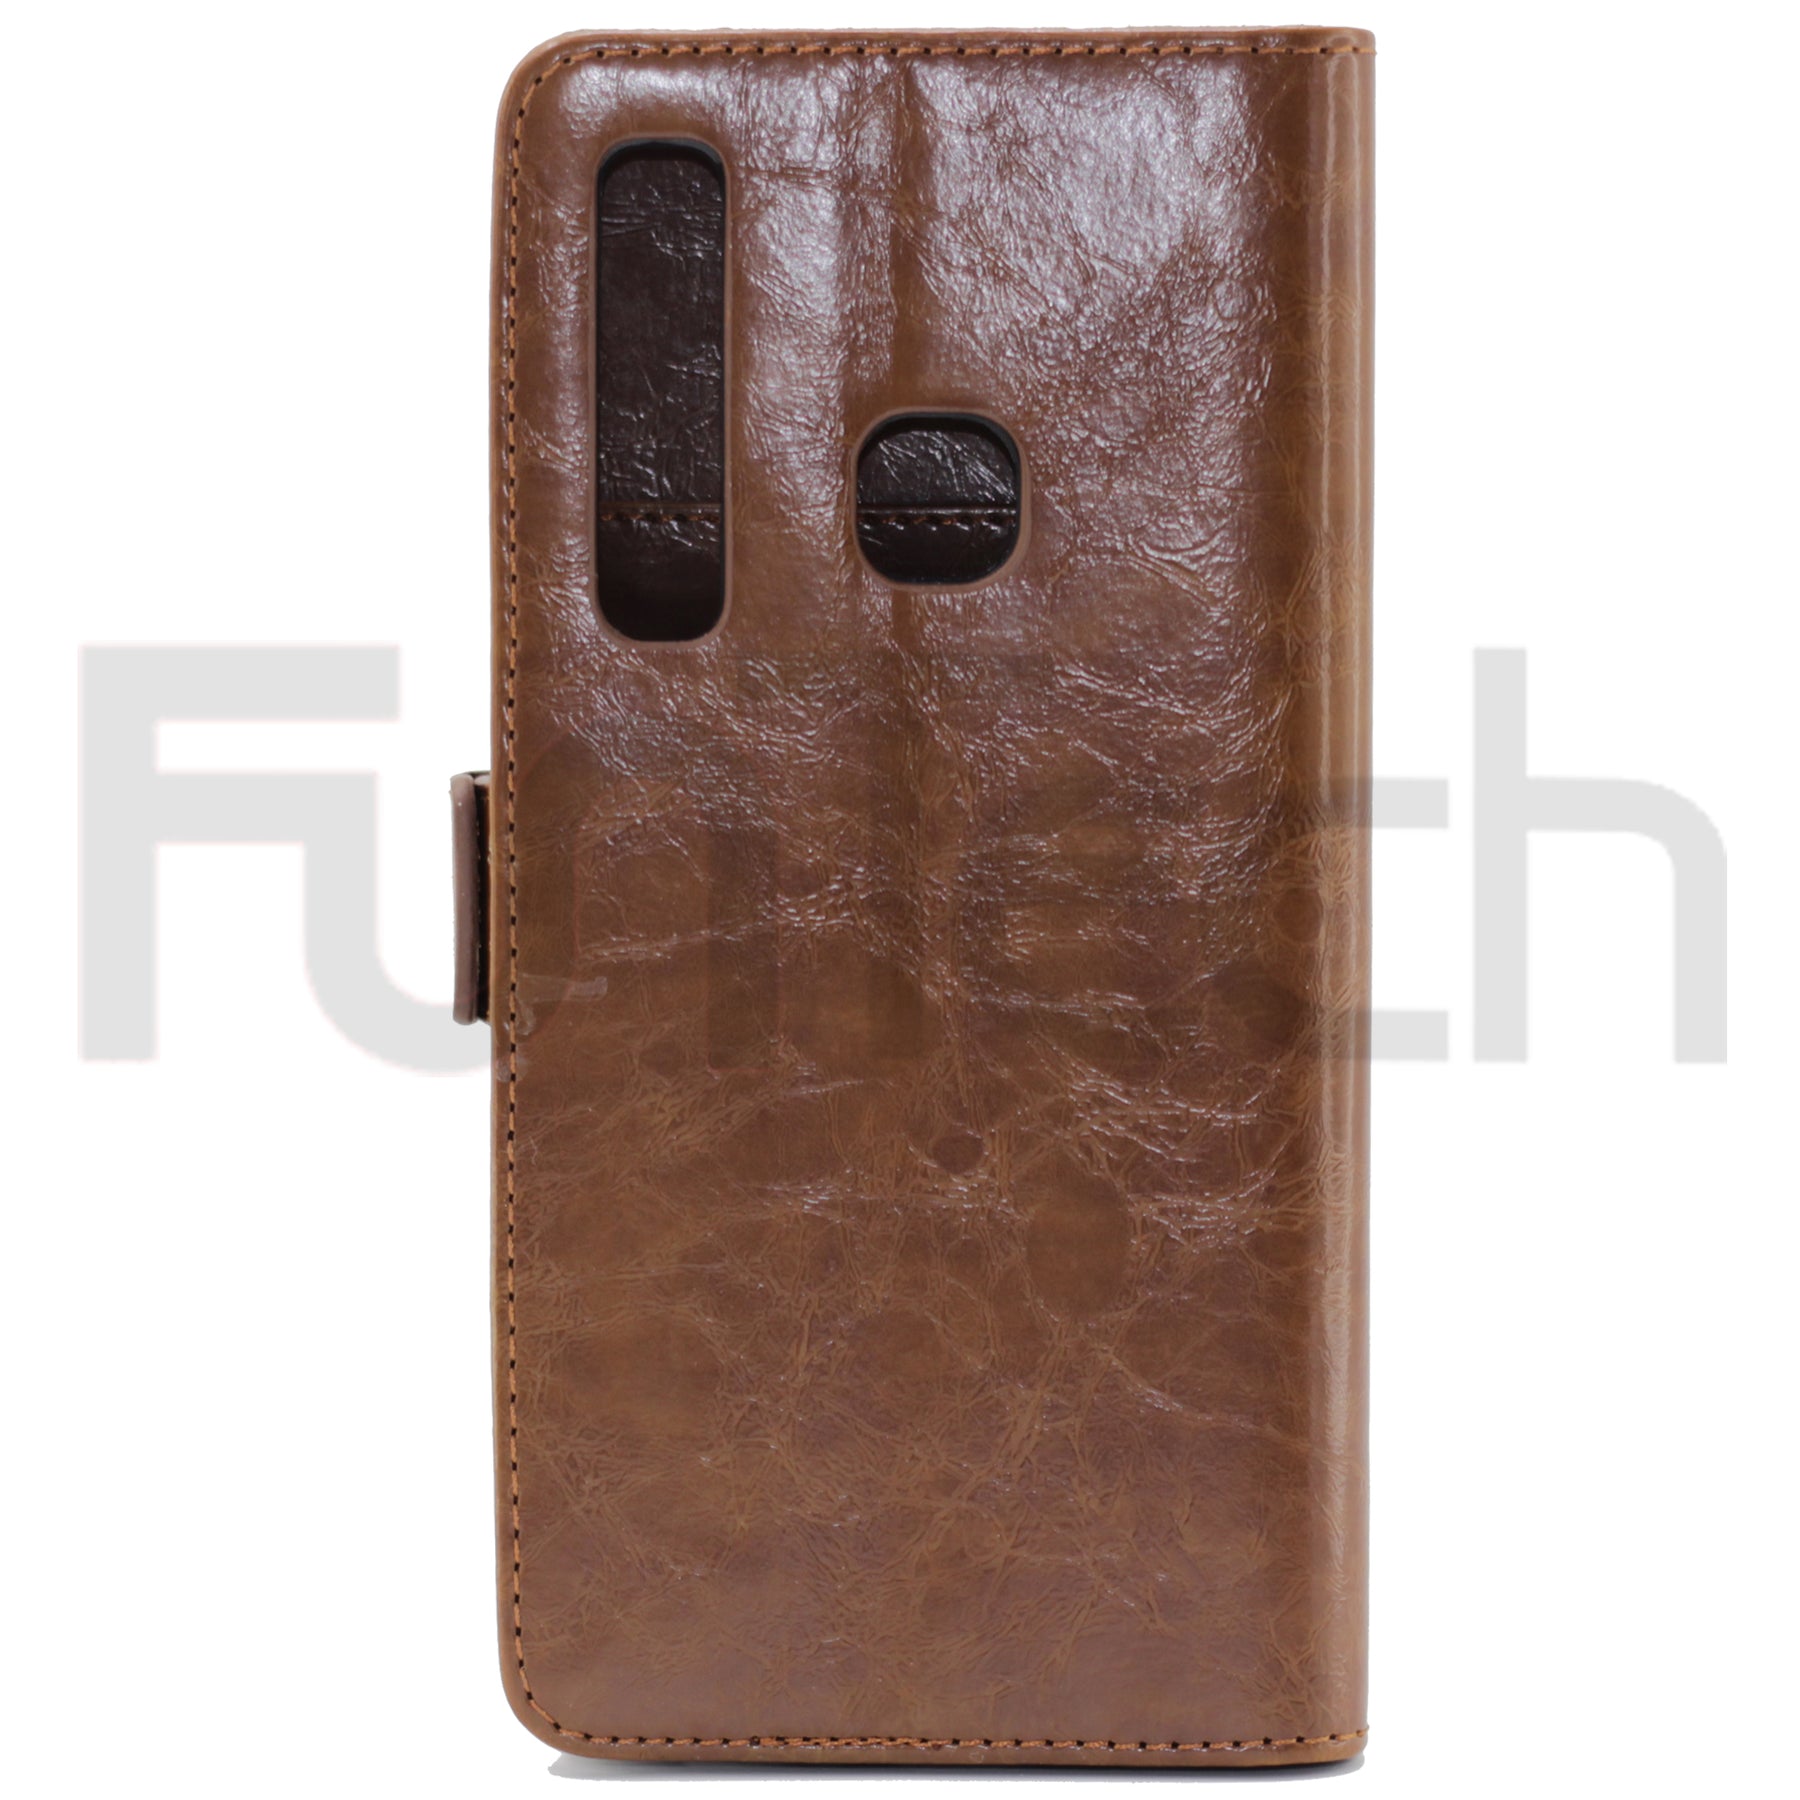 Samsung A9 2018, Leather Wallet Case, Color Brown.